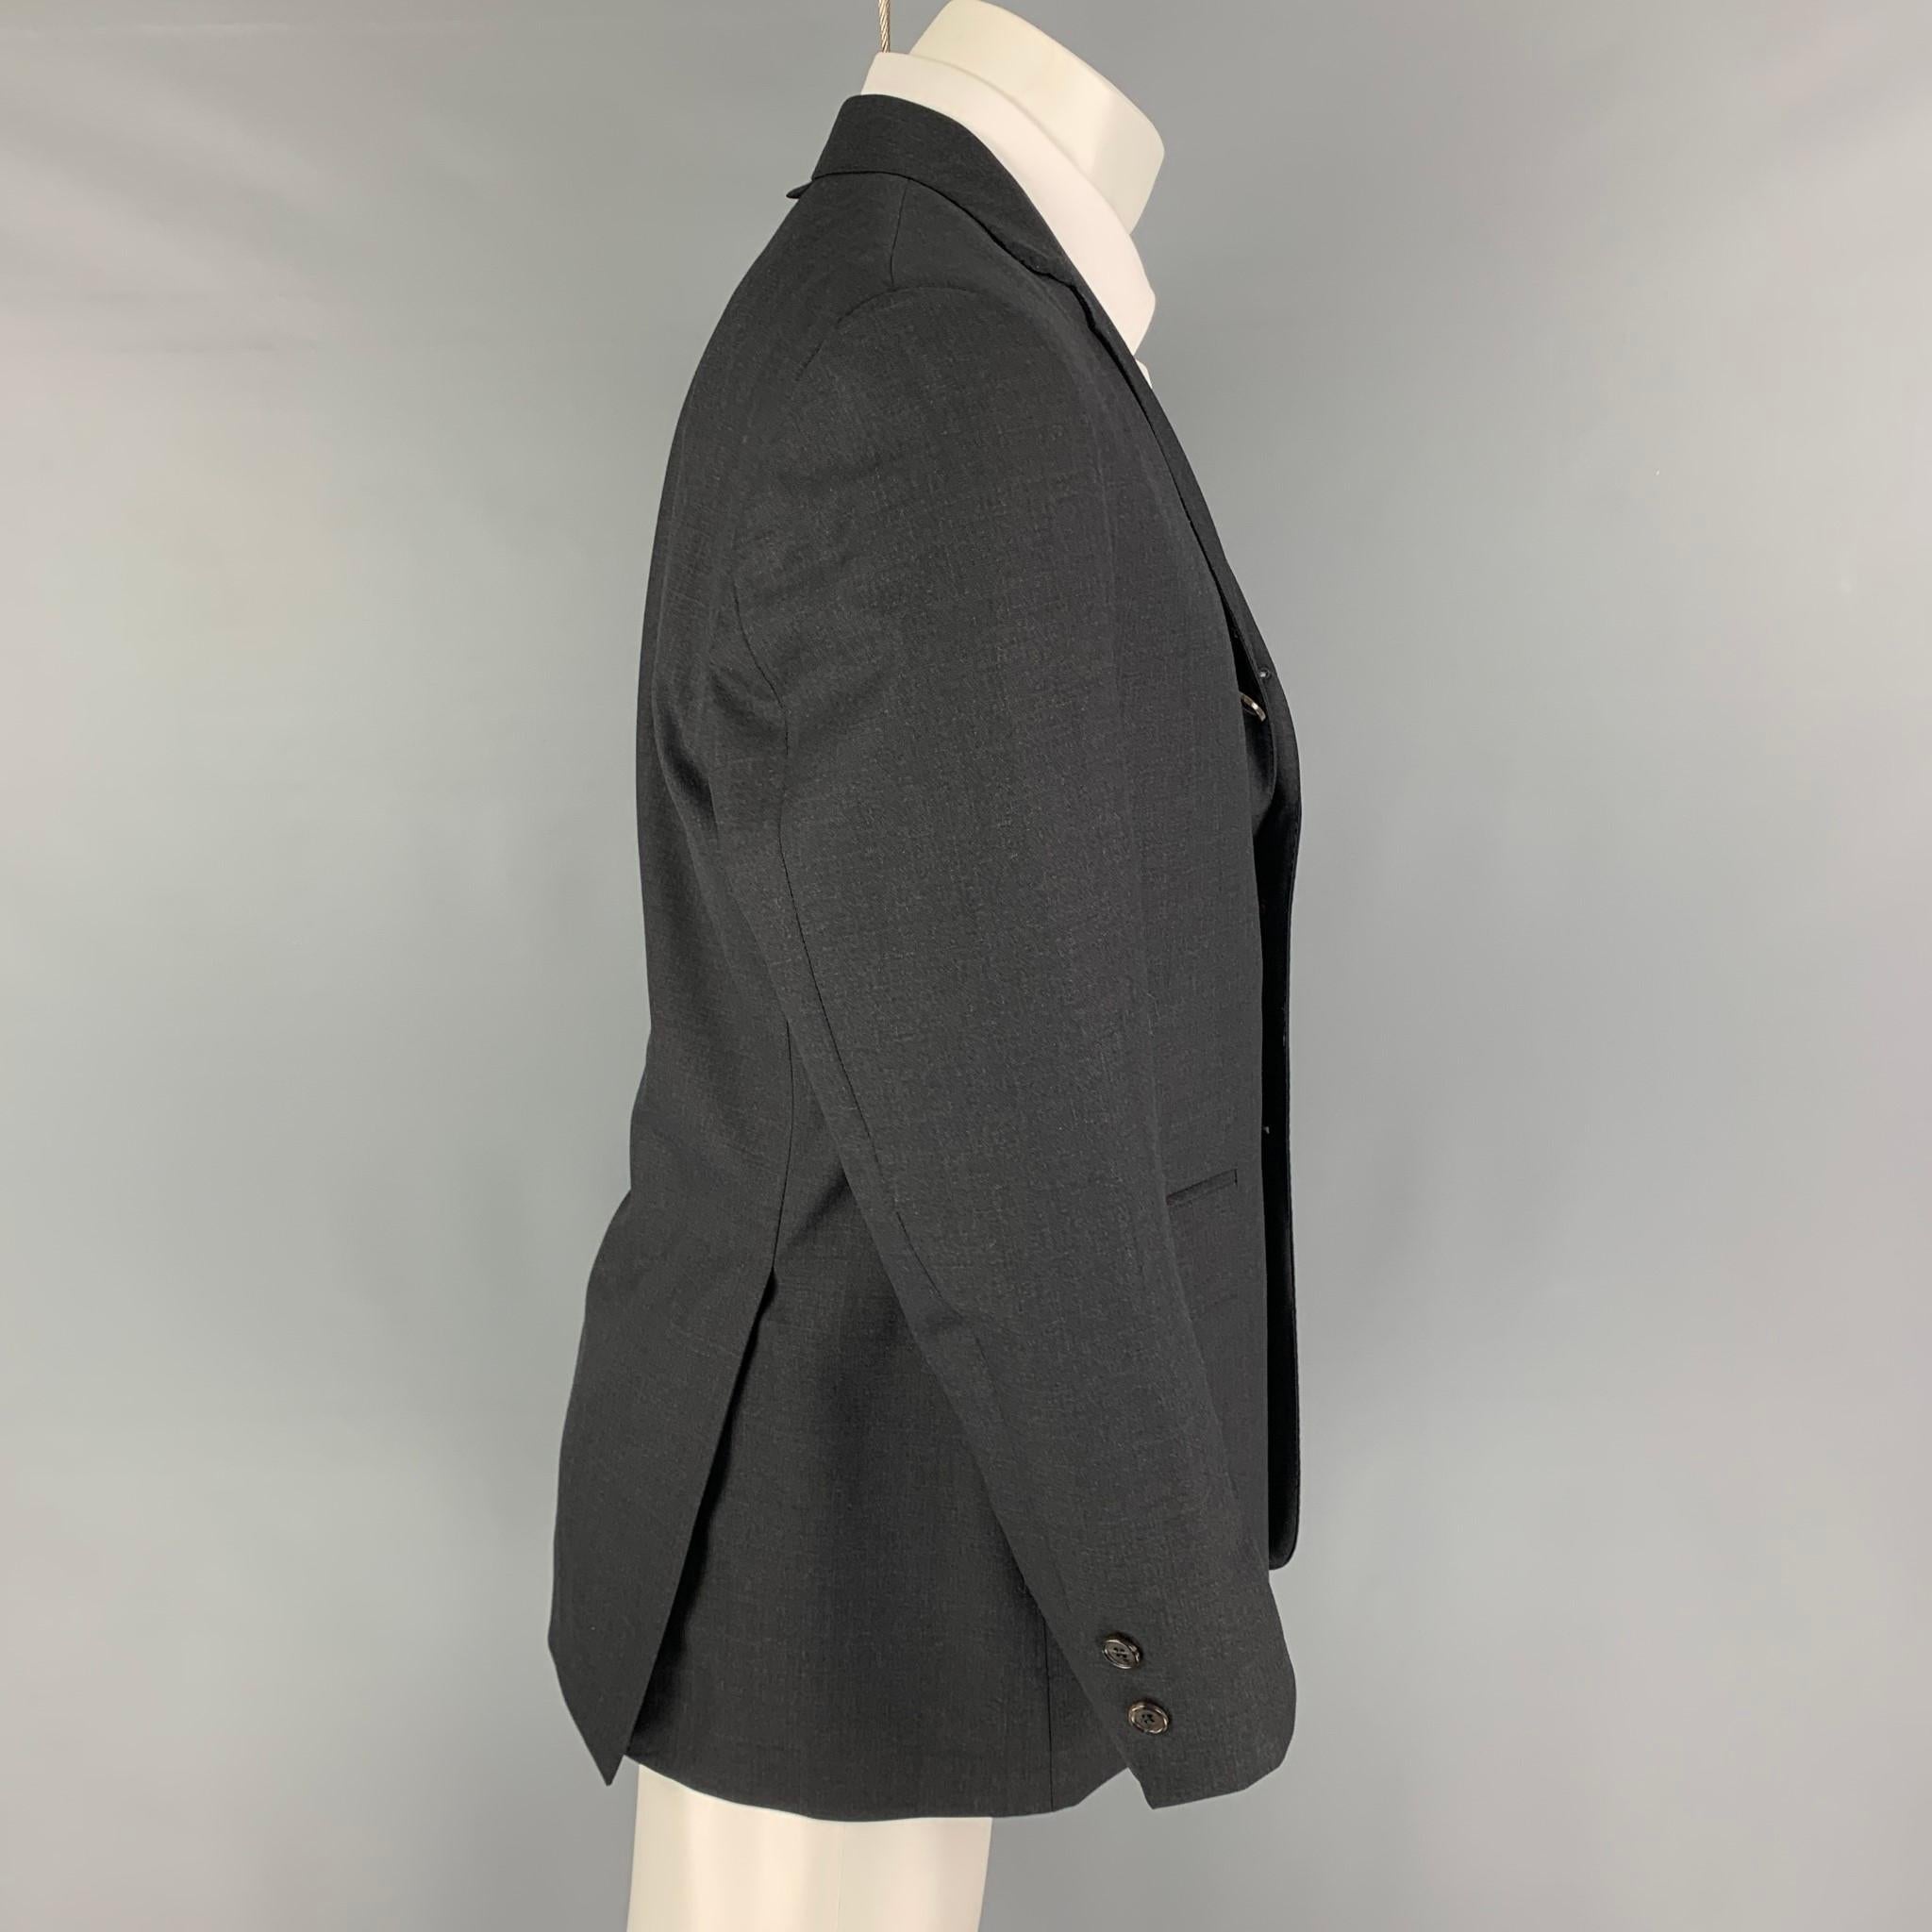 BLACK FLEECE sport coat comes in a charcoal wool  with a full liner featuring a notch lapel, flap pockets, double back vent, and a three button closure. Made in USA. 

Excellent Pre-Owned Condition.
Marked: 40

Measurements:

Shoulder: 18 in.
Chest: